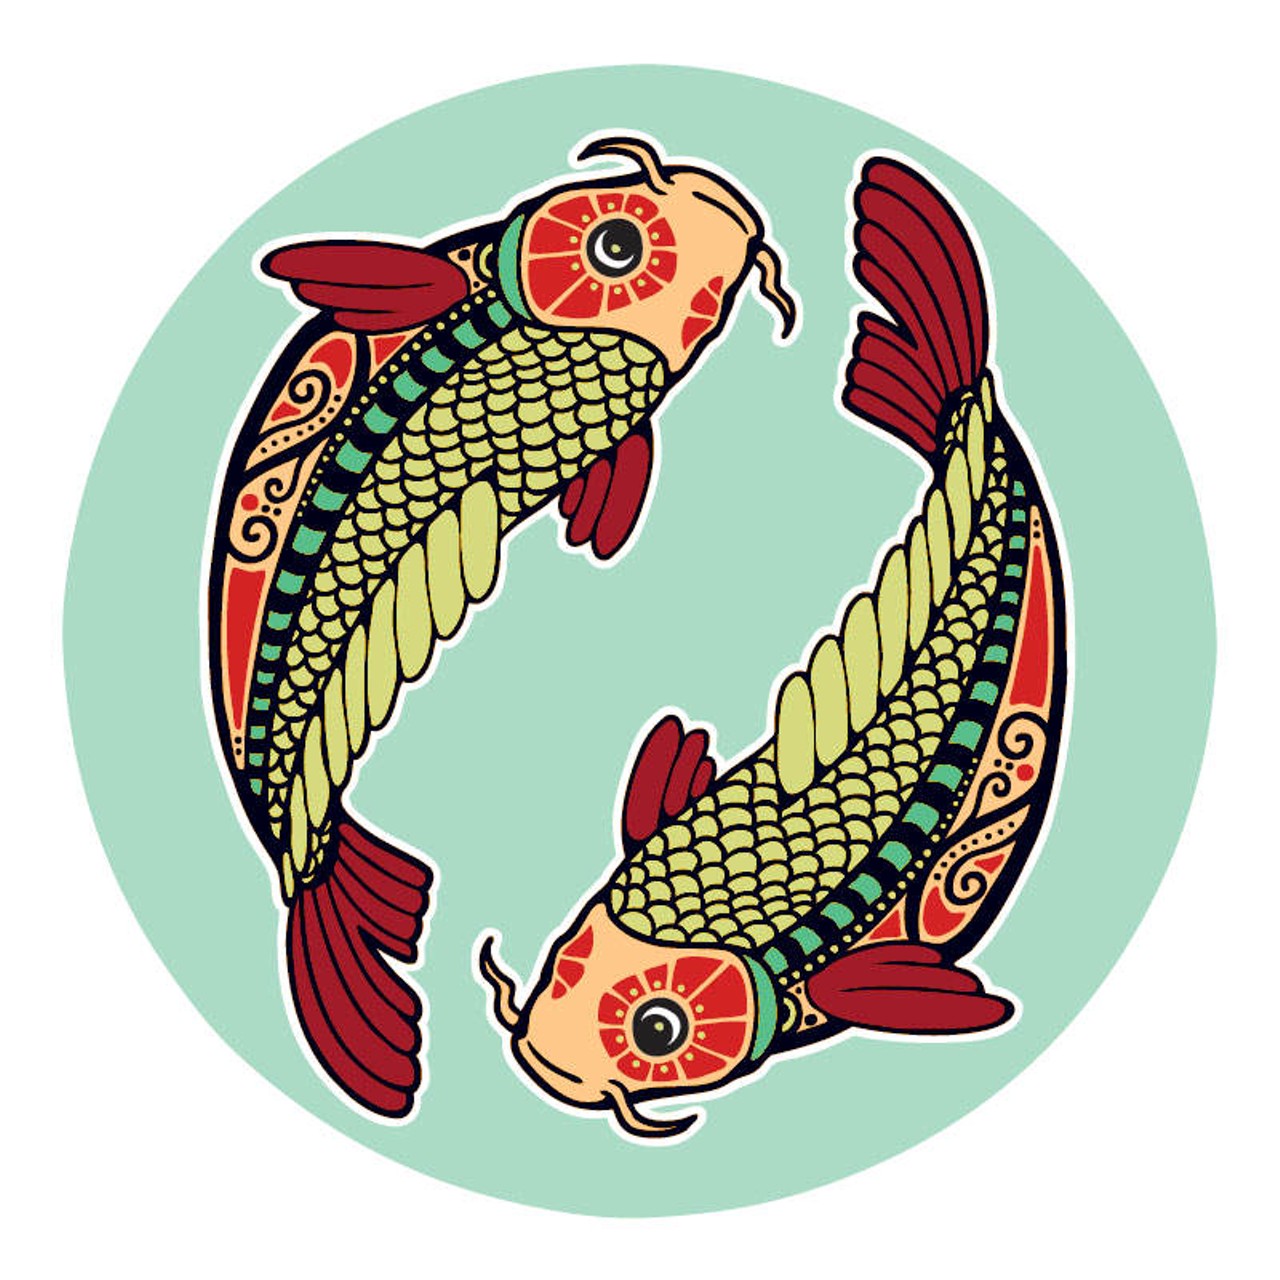 PISCES (Feb. 21-March 20): 
As far as right now goes, you feel pretty clear. As far as the past goes, you know you messed up. The side effects of whatever you did, or did not do, are staring you in the face. Don&#146;t lose yourself to the thought that it&#146;s all your fault. God knows what makes us show up in people&#146;s lives the way we do. From here on out the path appears to be clear. As long as you keep your feet planted firmly on the high road and listen to the voice that knows more about this than you do, you&#146;ll be fine. Waiting patiently for people to know whether they need to come, or go, is part of the deal.